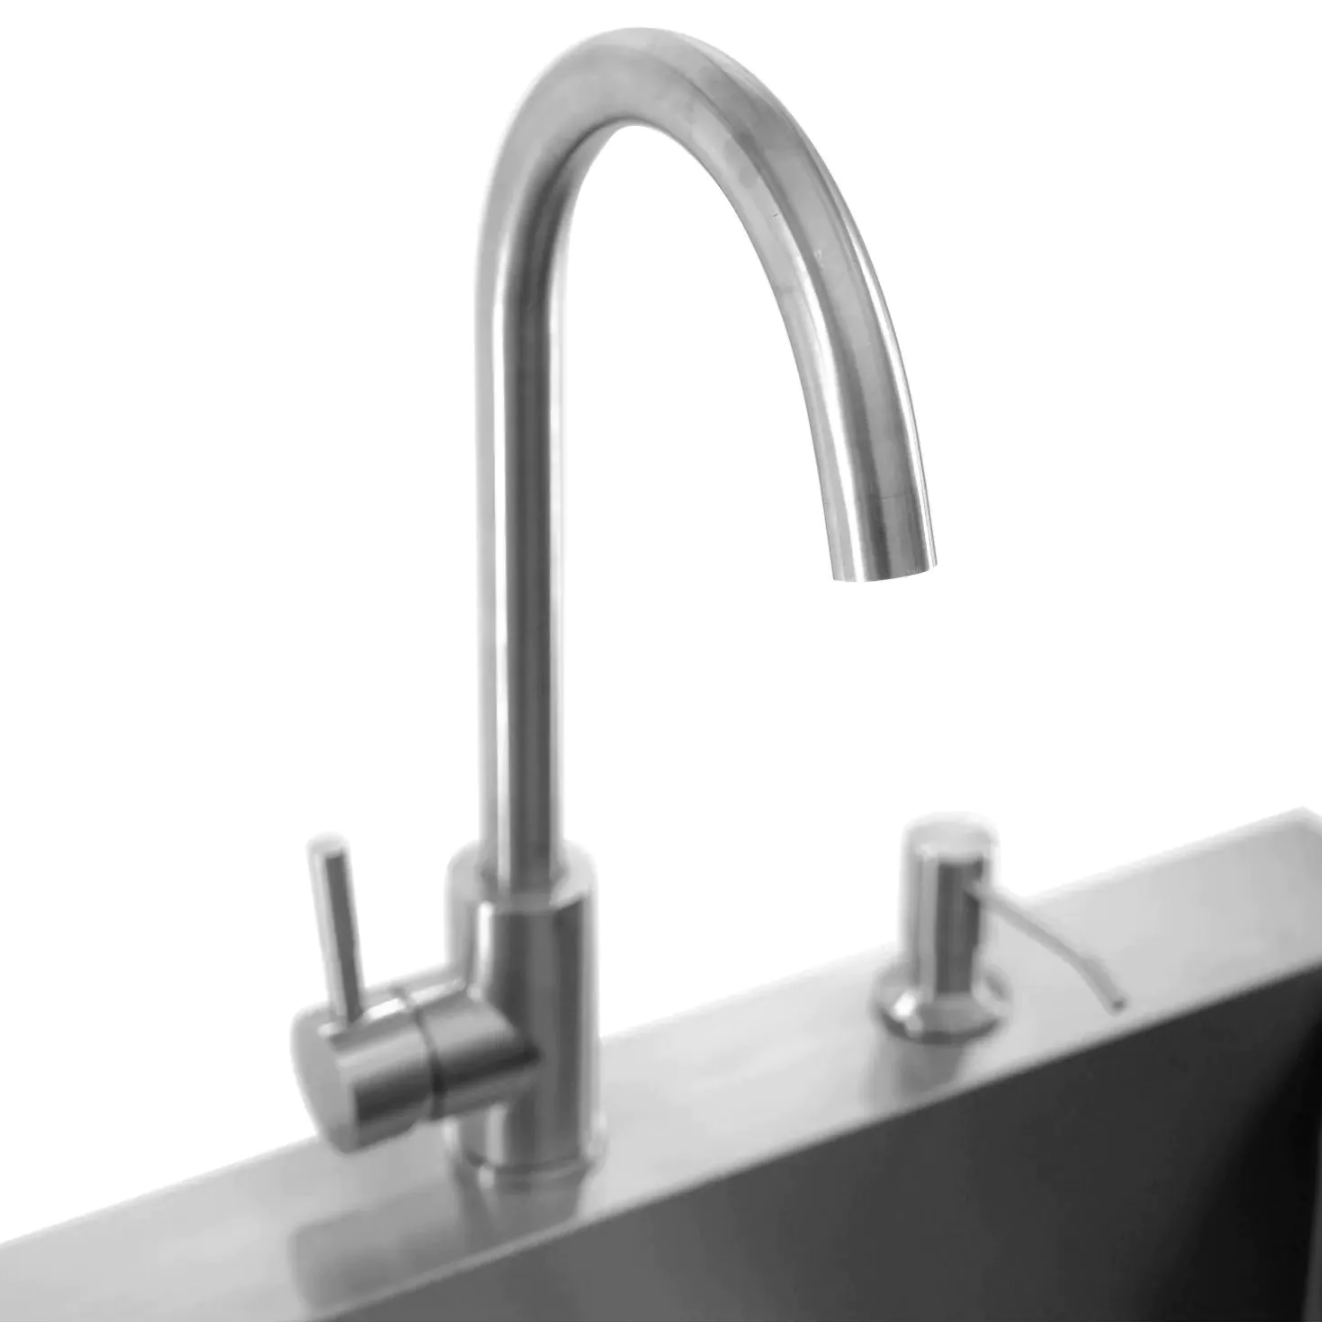 PCM 260 Series 21" Outdoor Rated Stainless Steel Drop In Sink With Hot/Cold Faucet